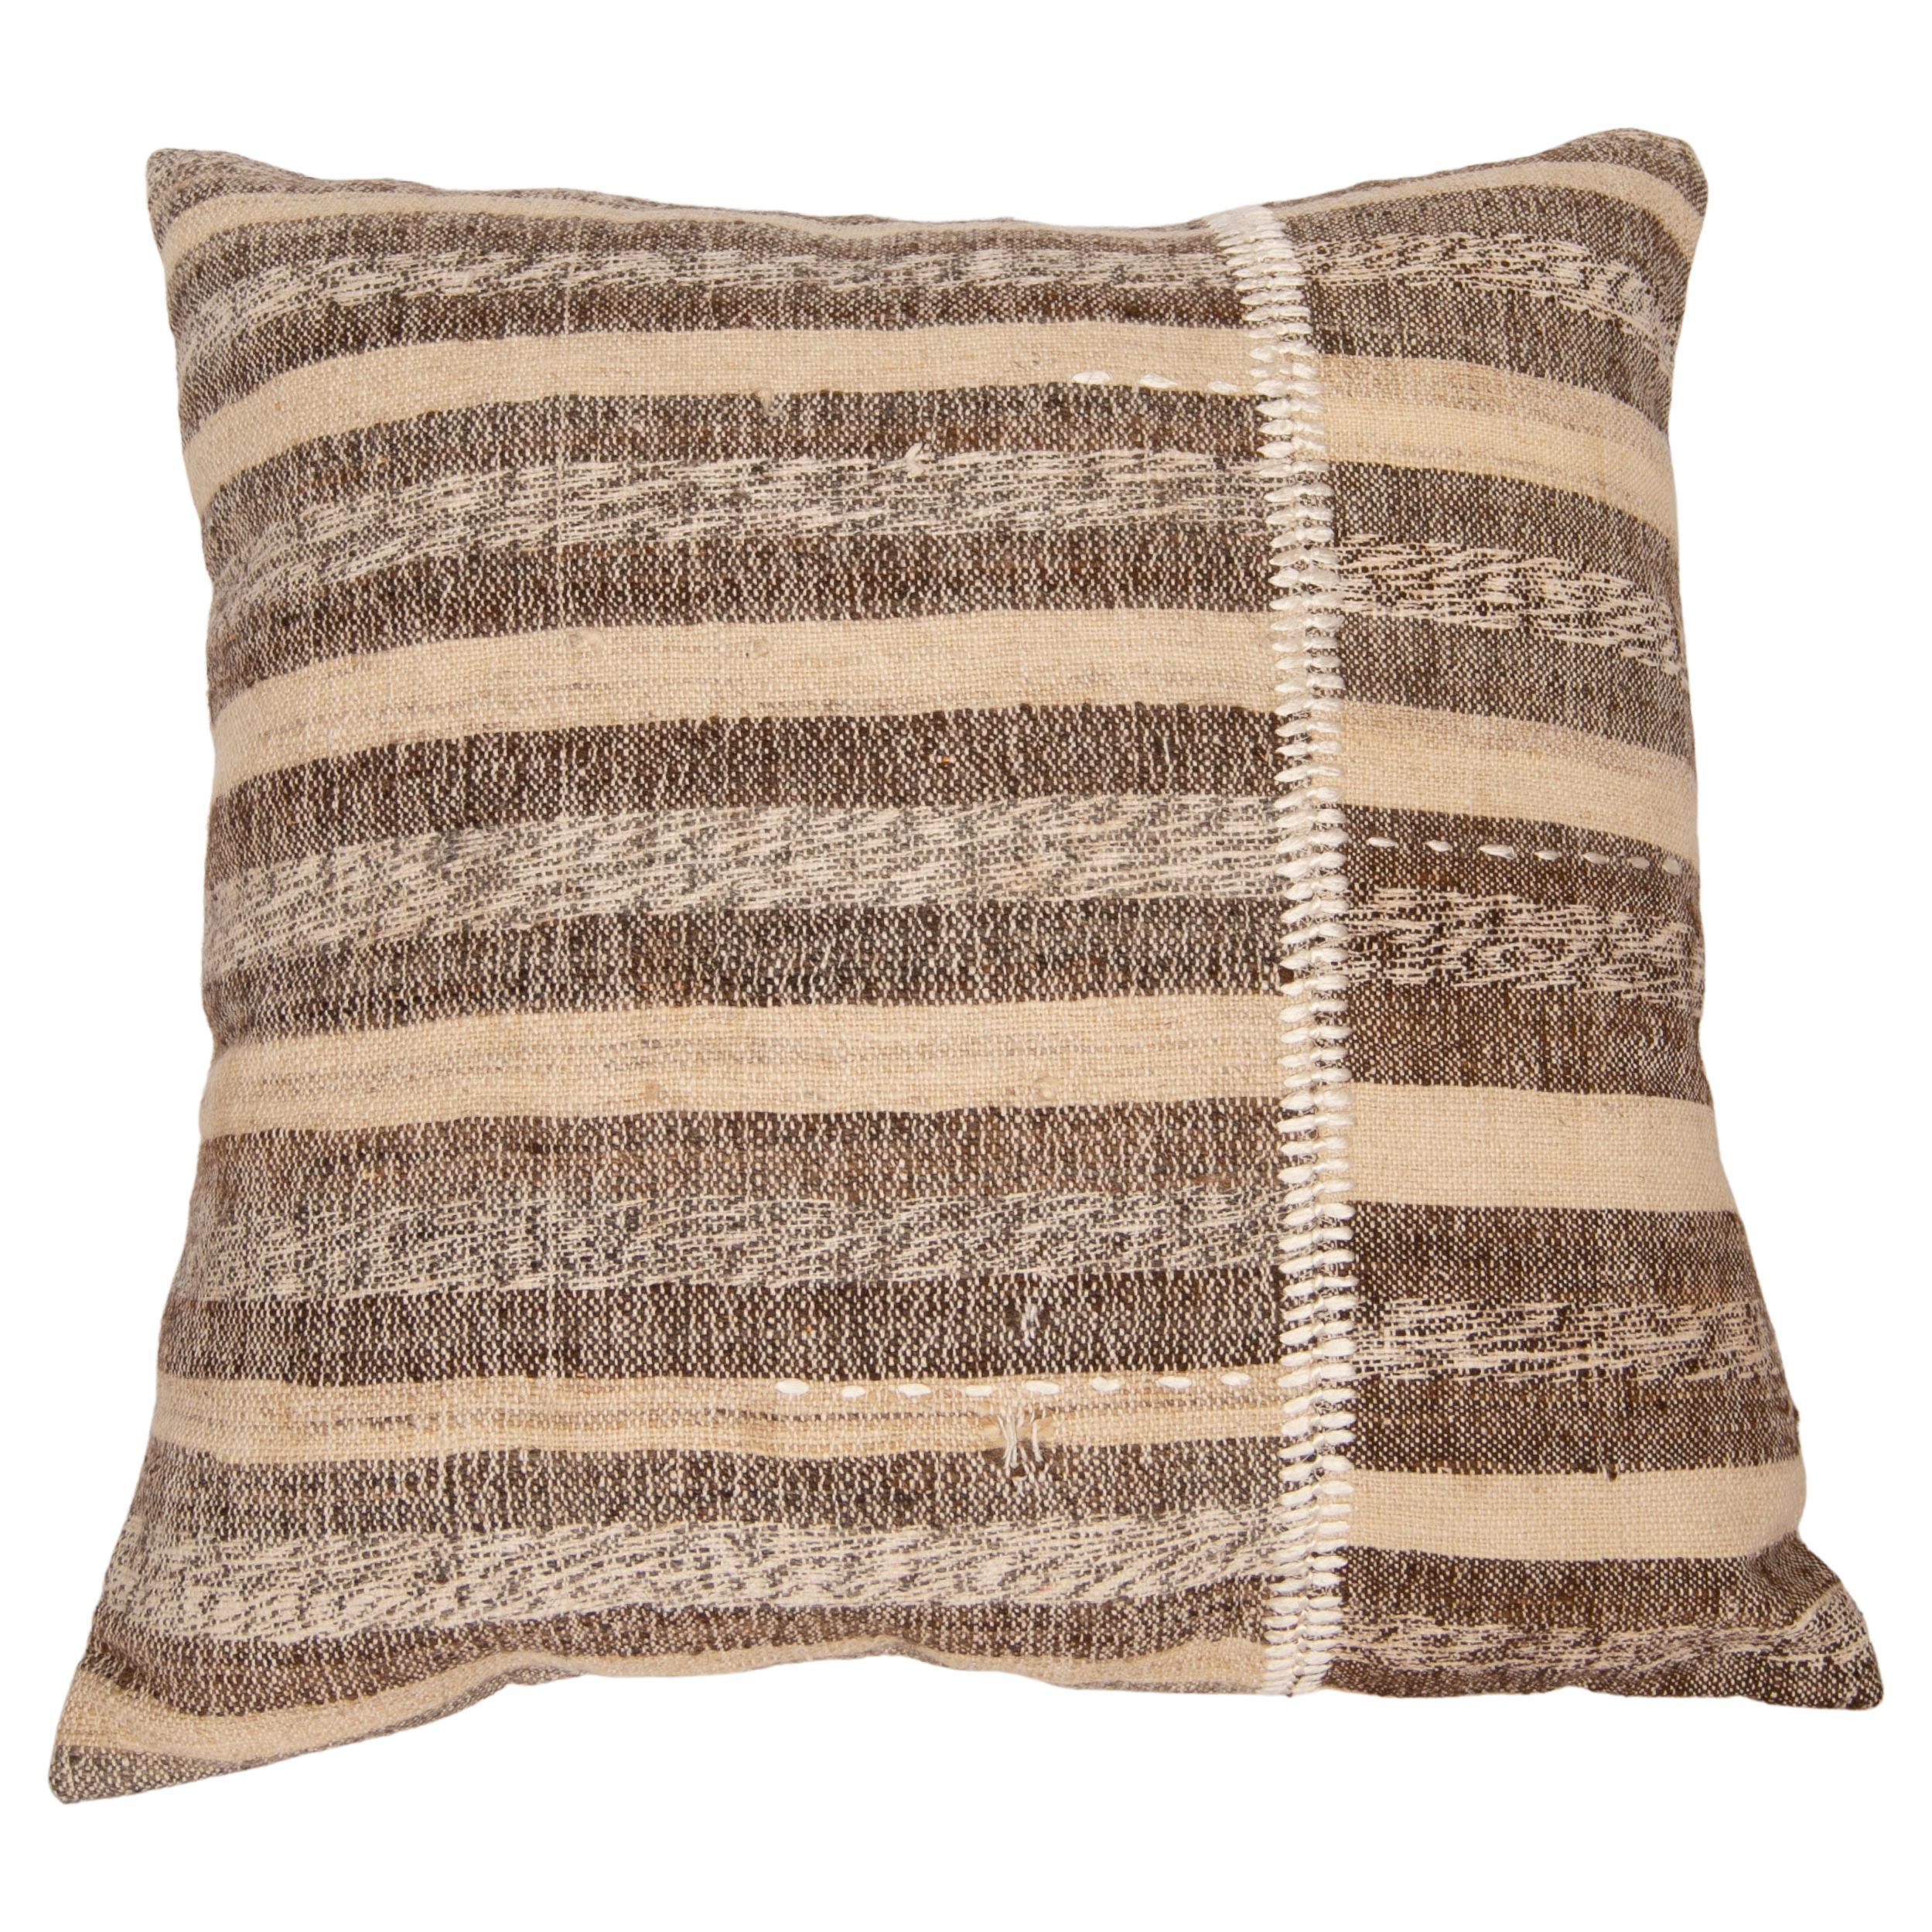 Pillow Case Made from Rustic Anatolian Vintage Kilim For Sale